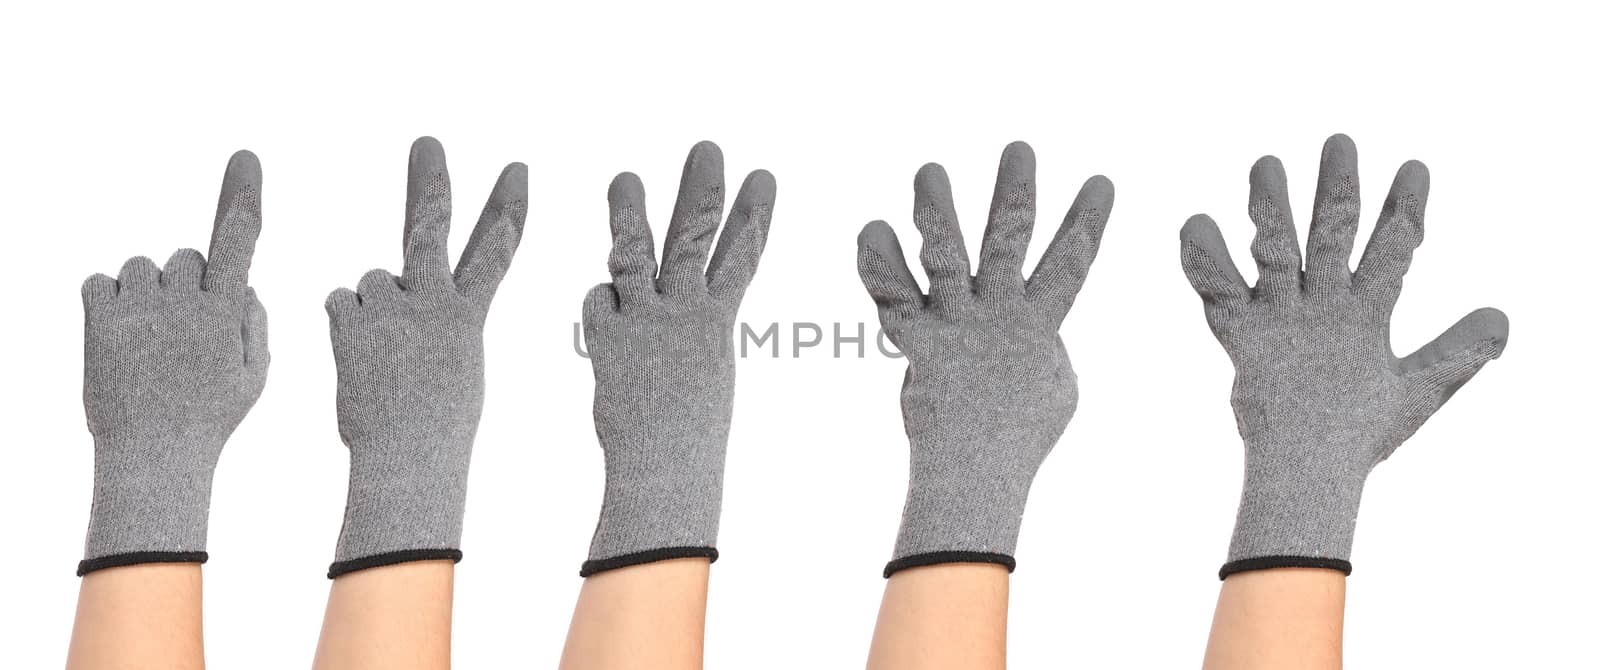 Hands in gloves show figures. Isolated on a white background